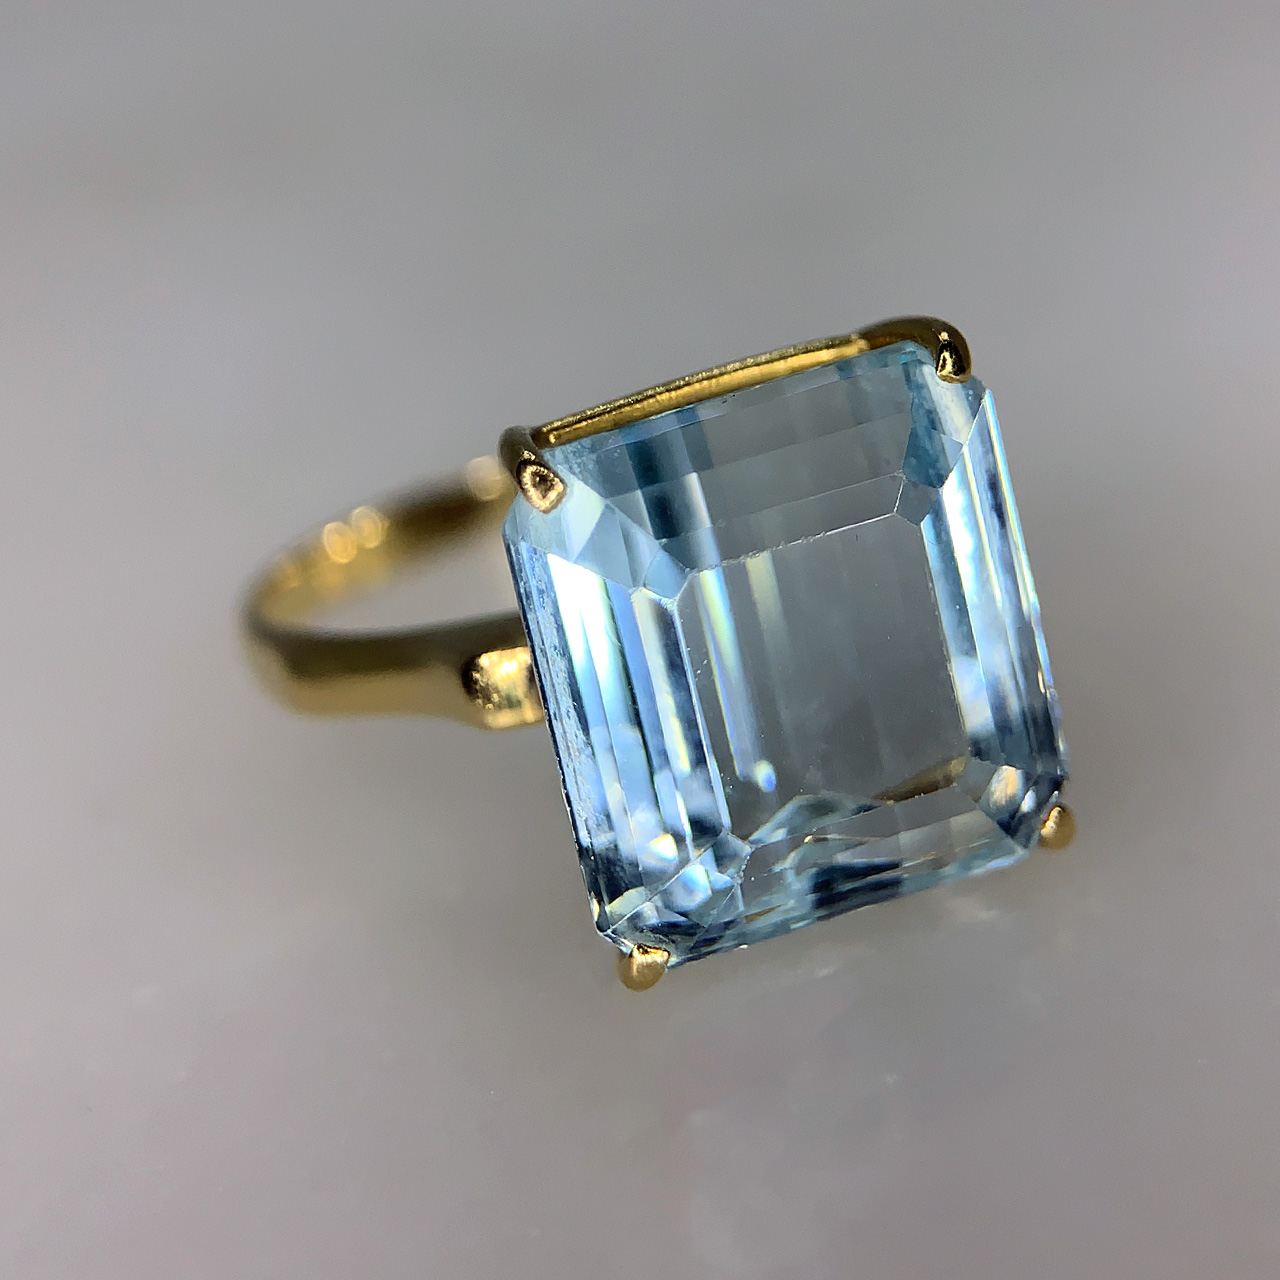 Vintage Solitaire Aquamarine Cocktail Ring. The emerald cut, crystal clear 5.5ct aquamarine jewel is set within a 18ct yellow gold basket.